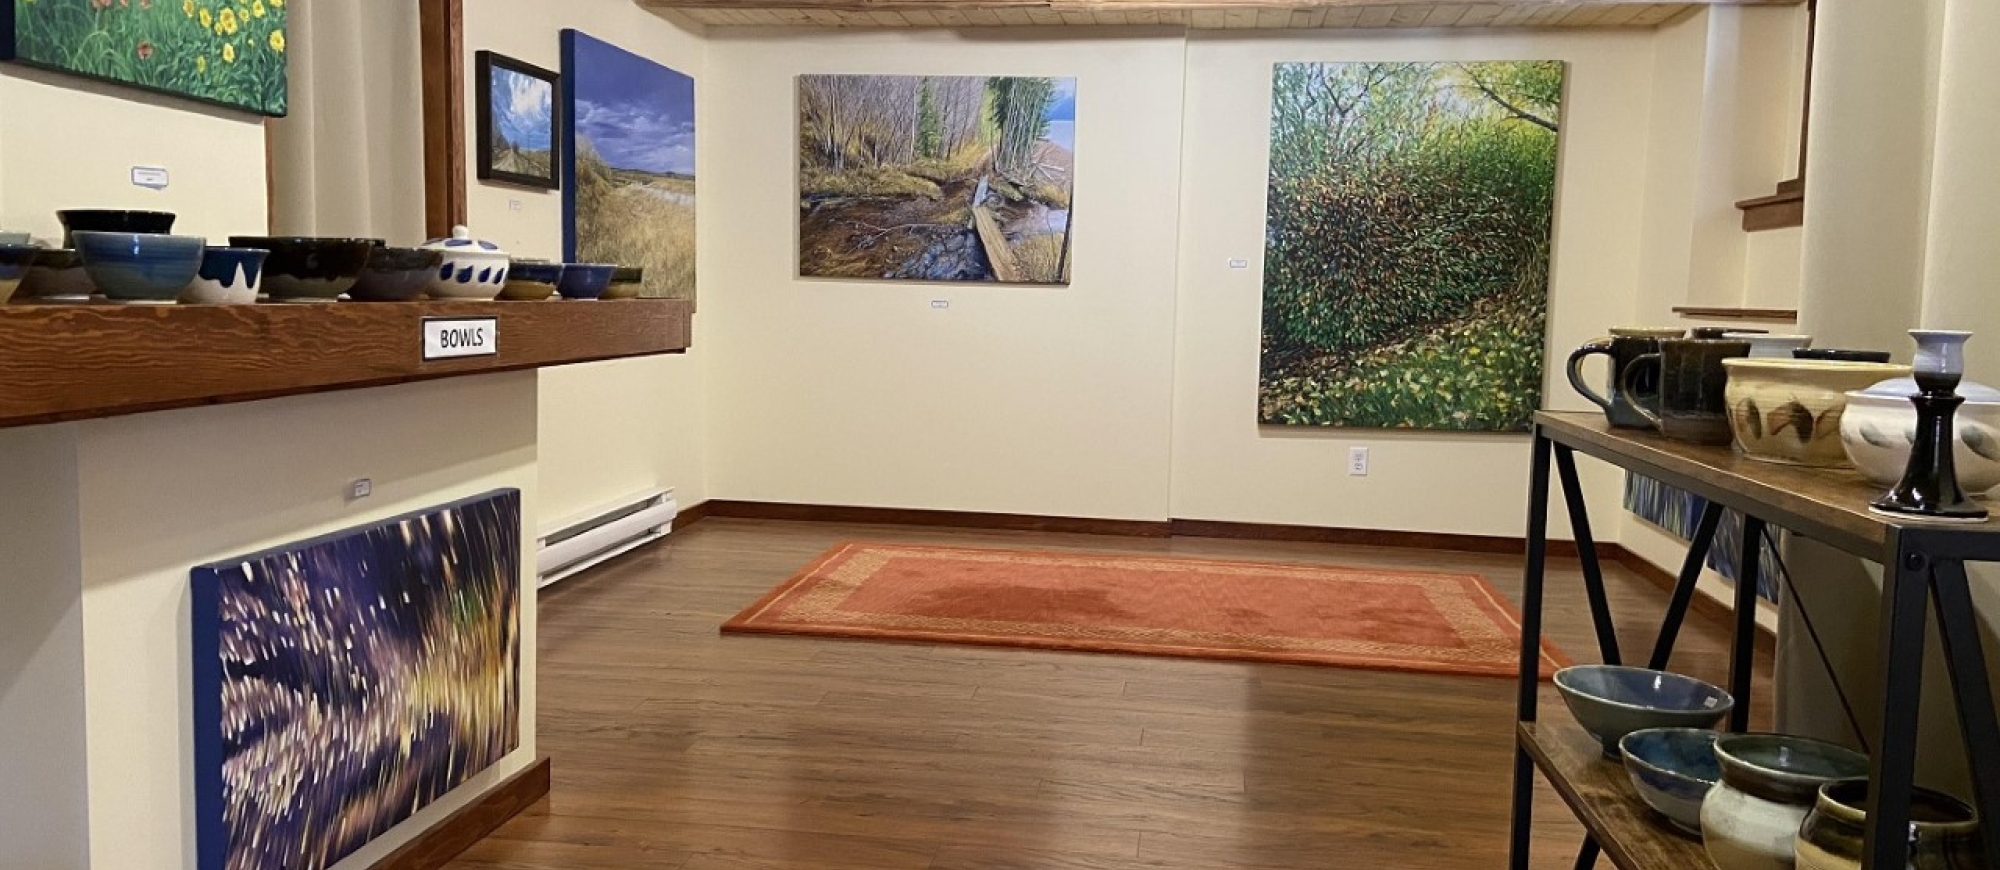 Inside of artist gallery with local paintings